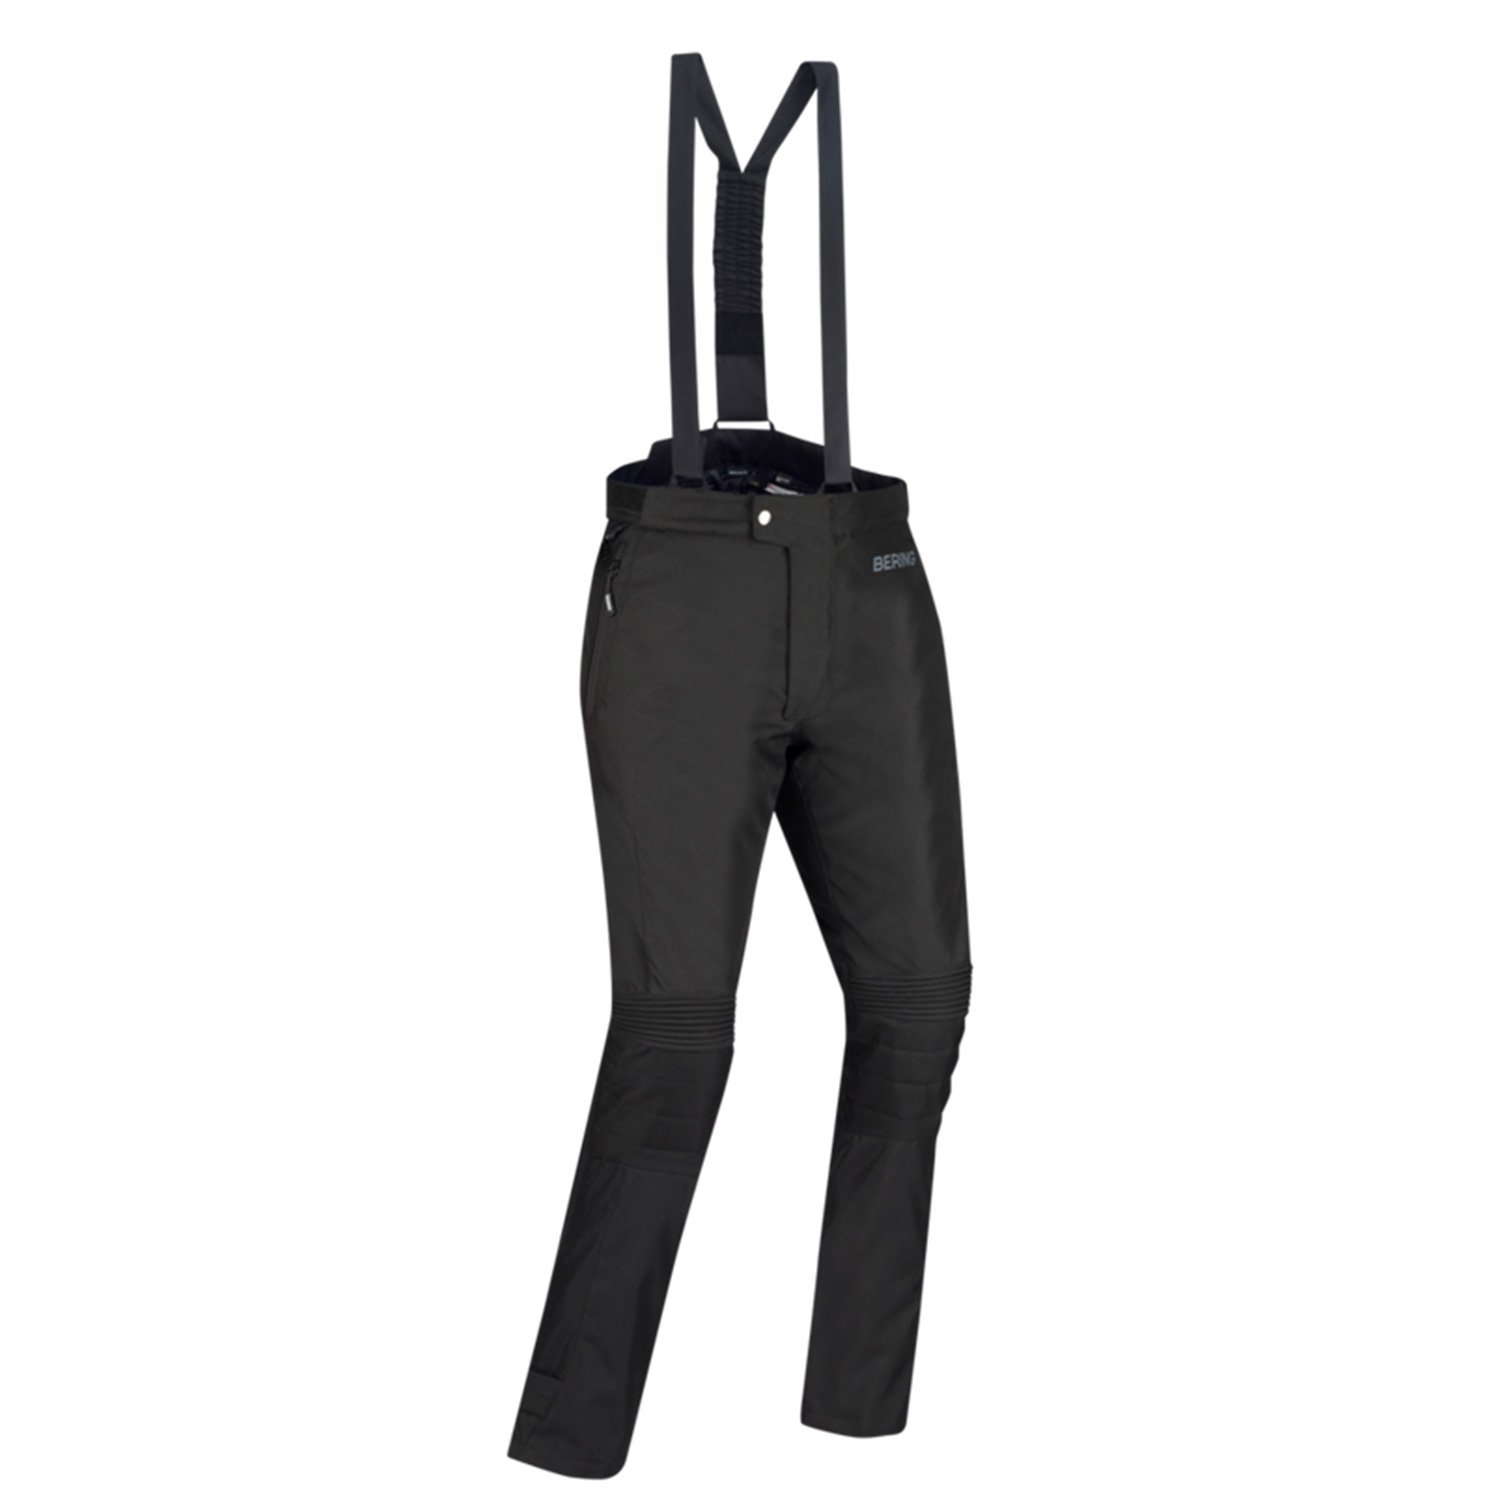 Image of Bering Lady Siberia Trousers Black Size T3 ID 3660815182925